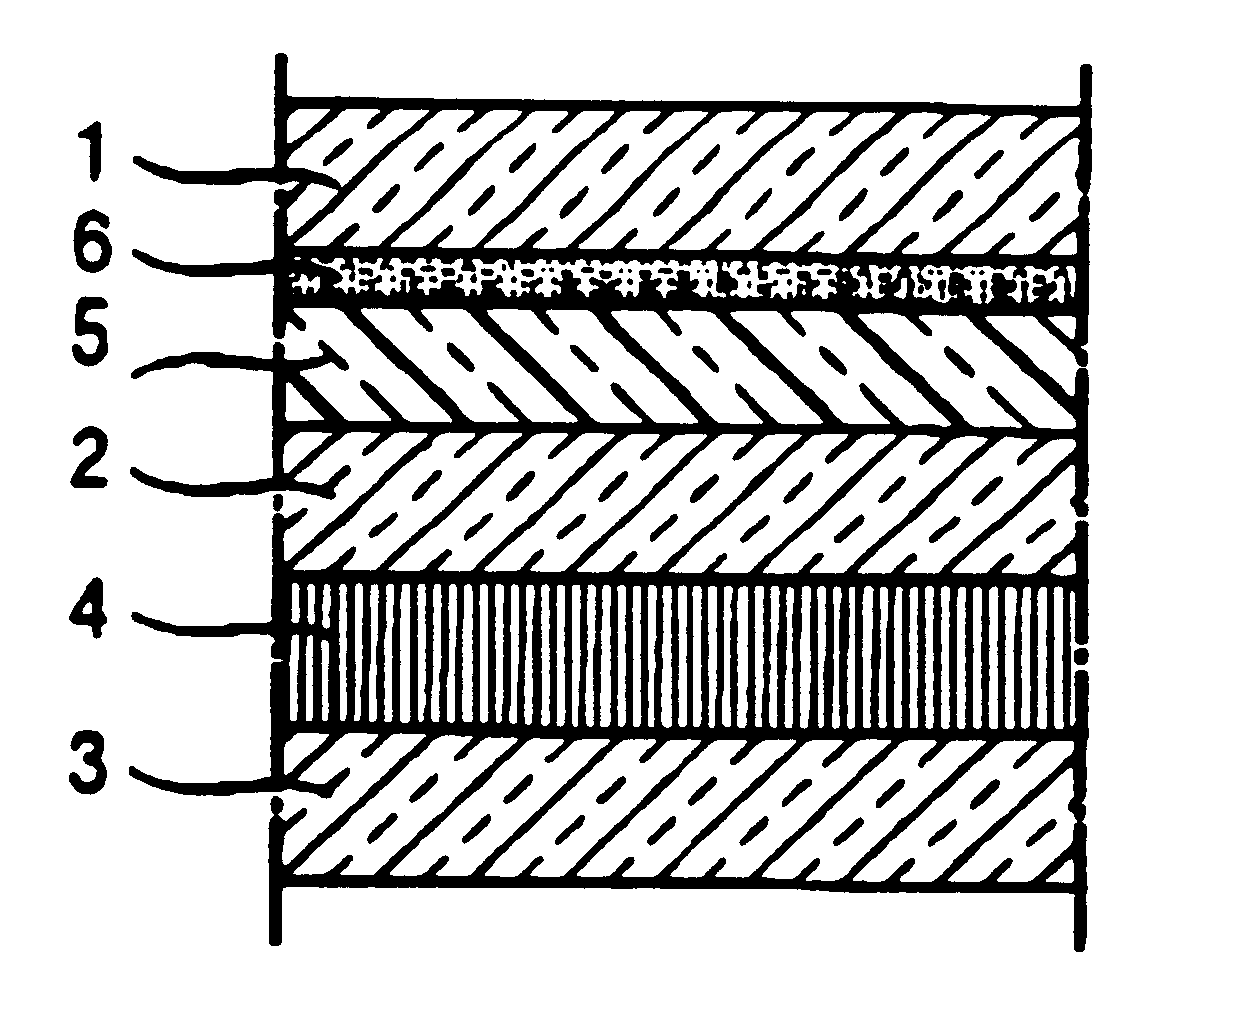 Glazing with variable optical and/or energetic properties